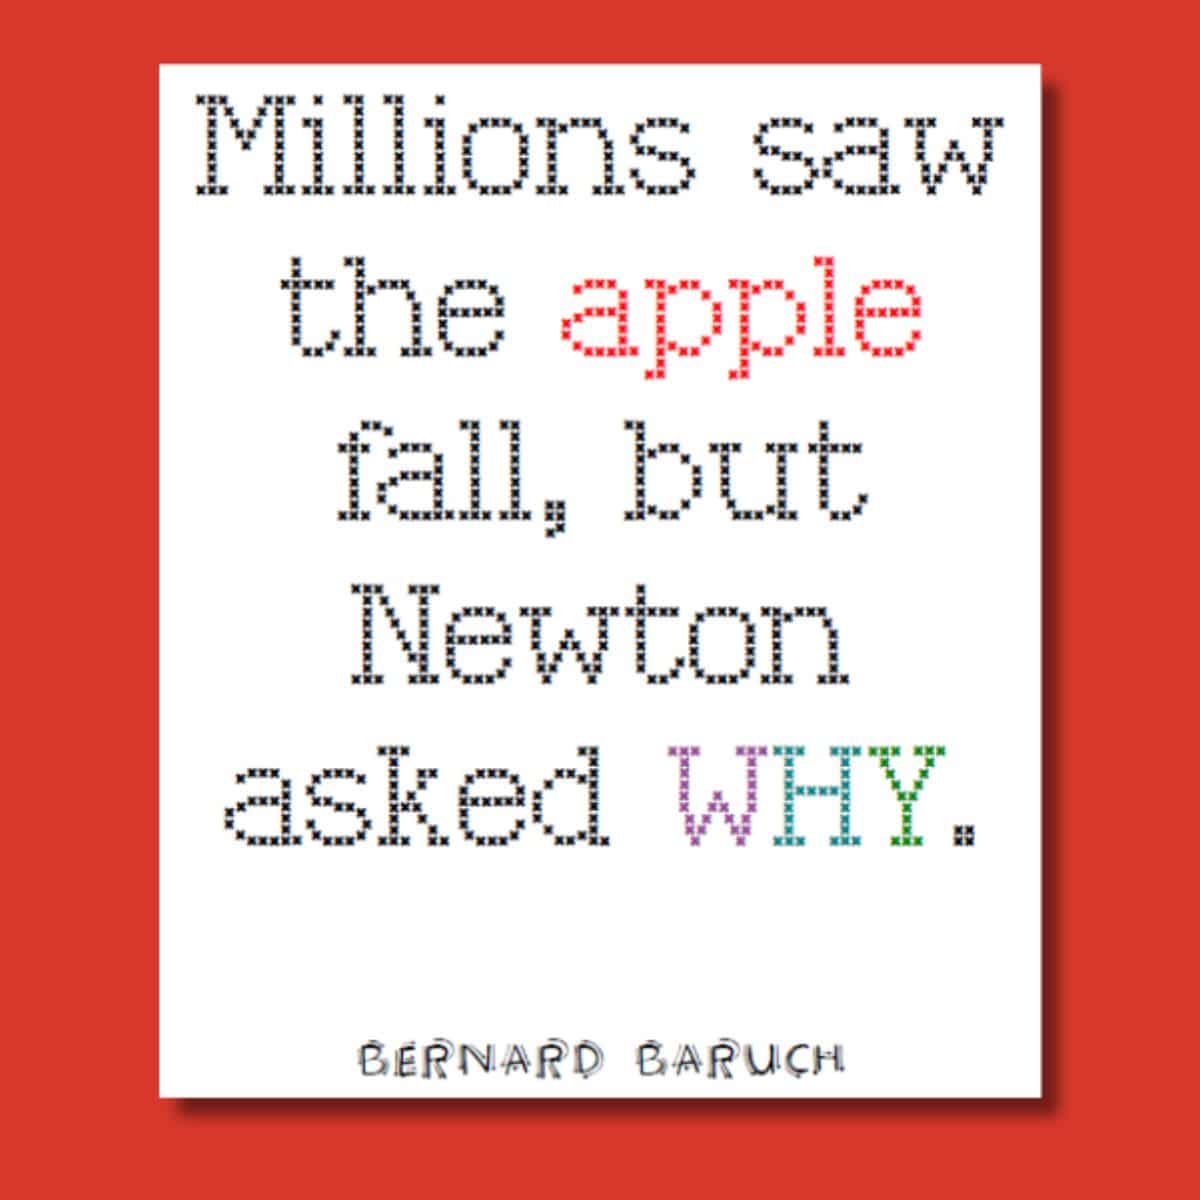 math quote poster: "Millions saw the apple fall, but Newton asked WHY "- quote poster by bernard baruch